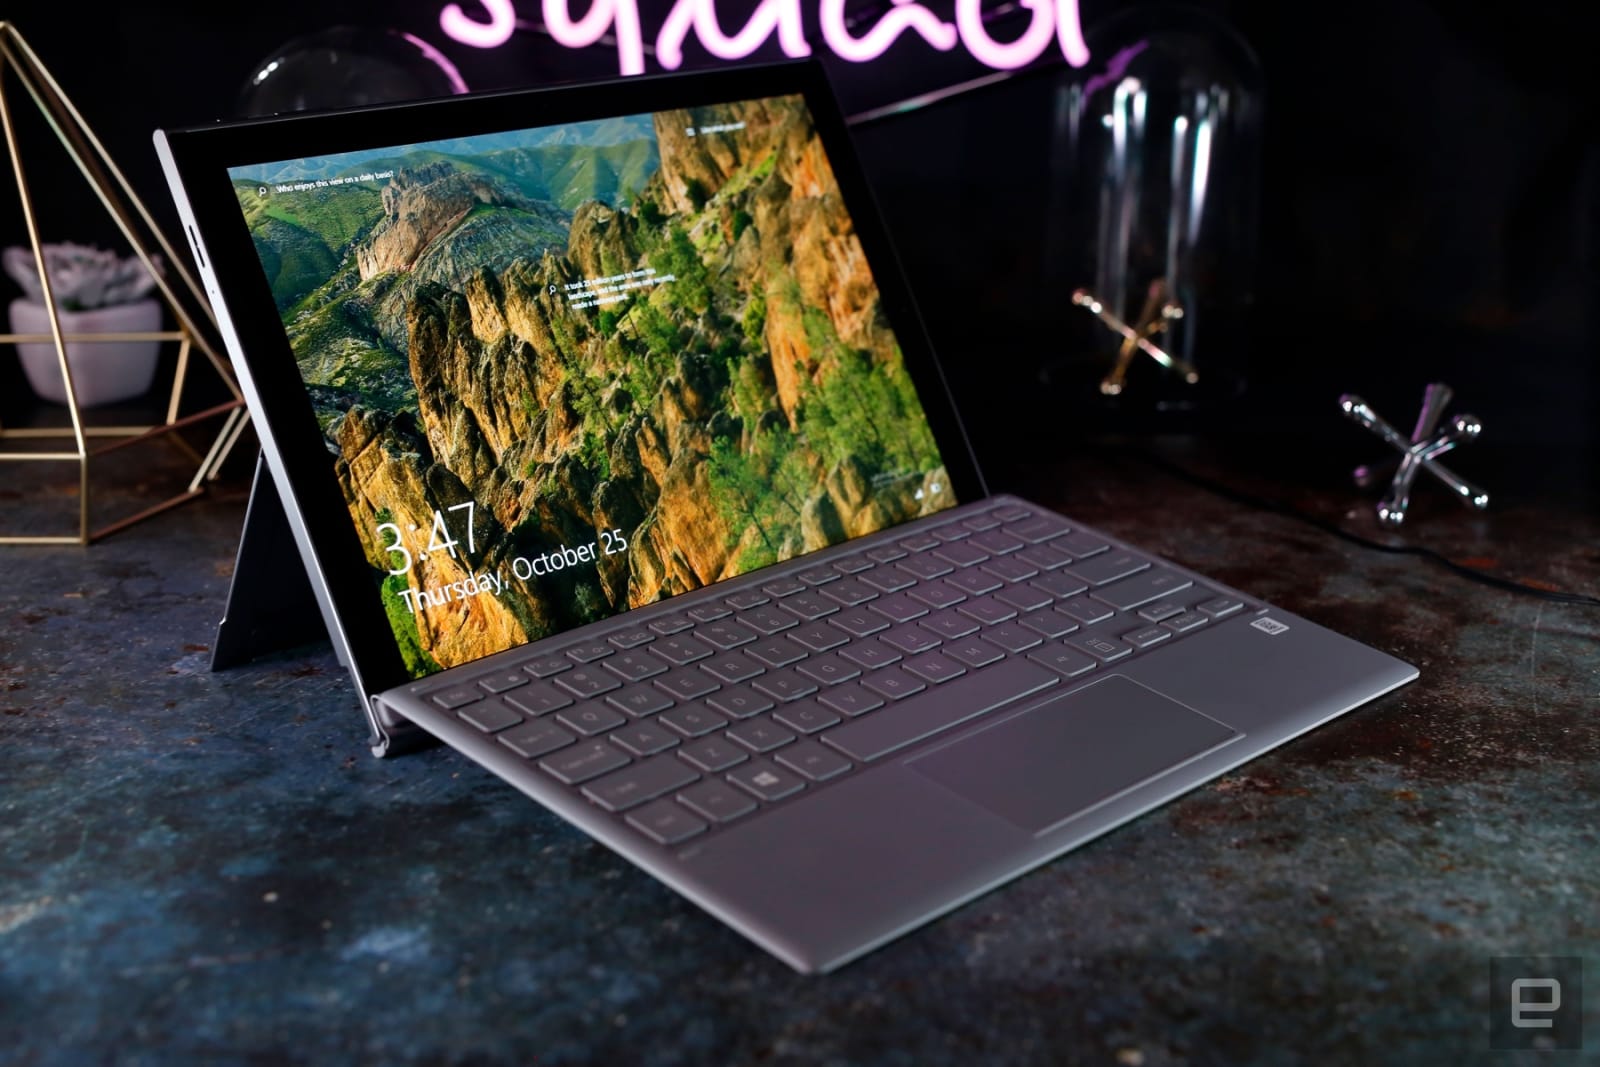 Samsung Galaxy Book 2 review: A better, but limited Surface rival